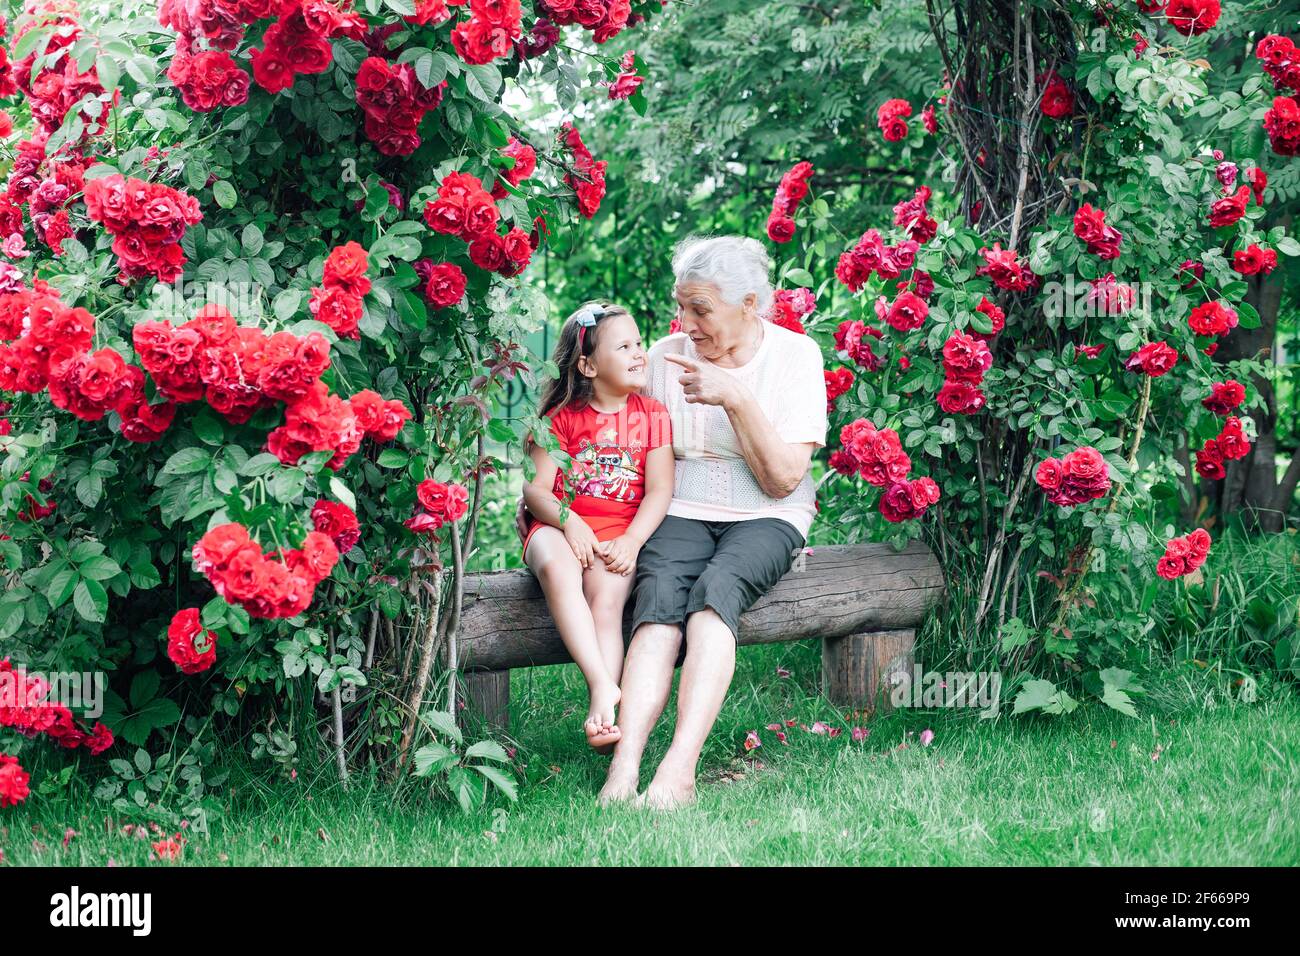 gray-haired old lady touches granddaughter's nose with her index finger, symbol or gesture of instruction, sitting on a bench under an arch of roses Stock Photo